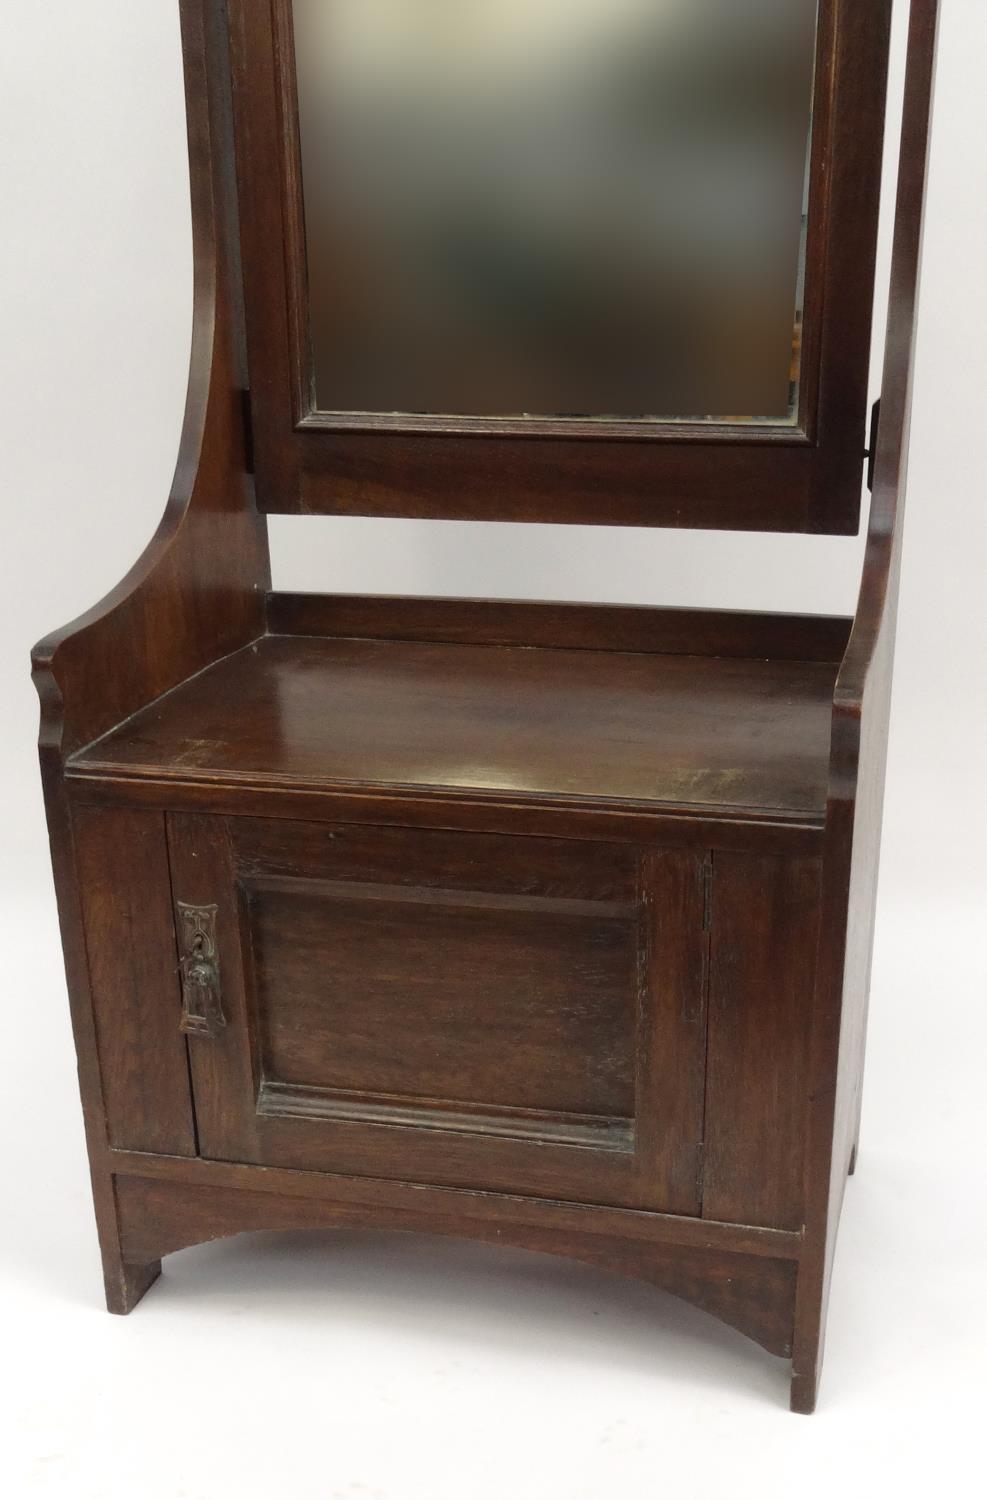 Arts and crafts oak hall mirror with brass plaque and cupboard base, 180cm high x 61cm wide x 43cm - Image 2 of 5